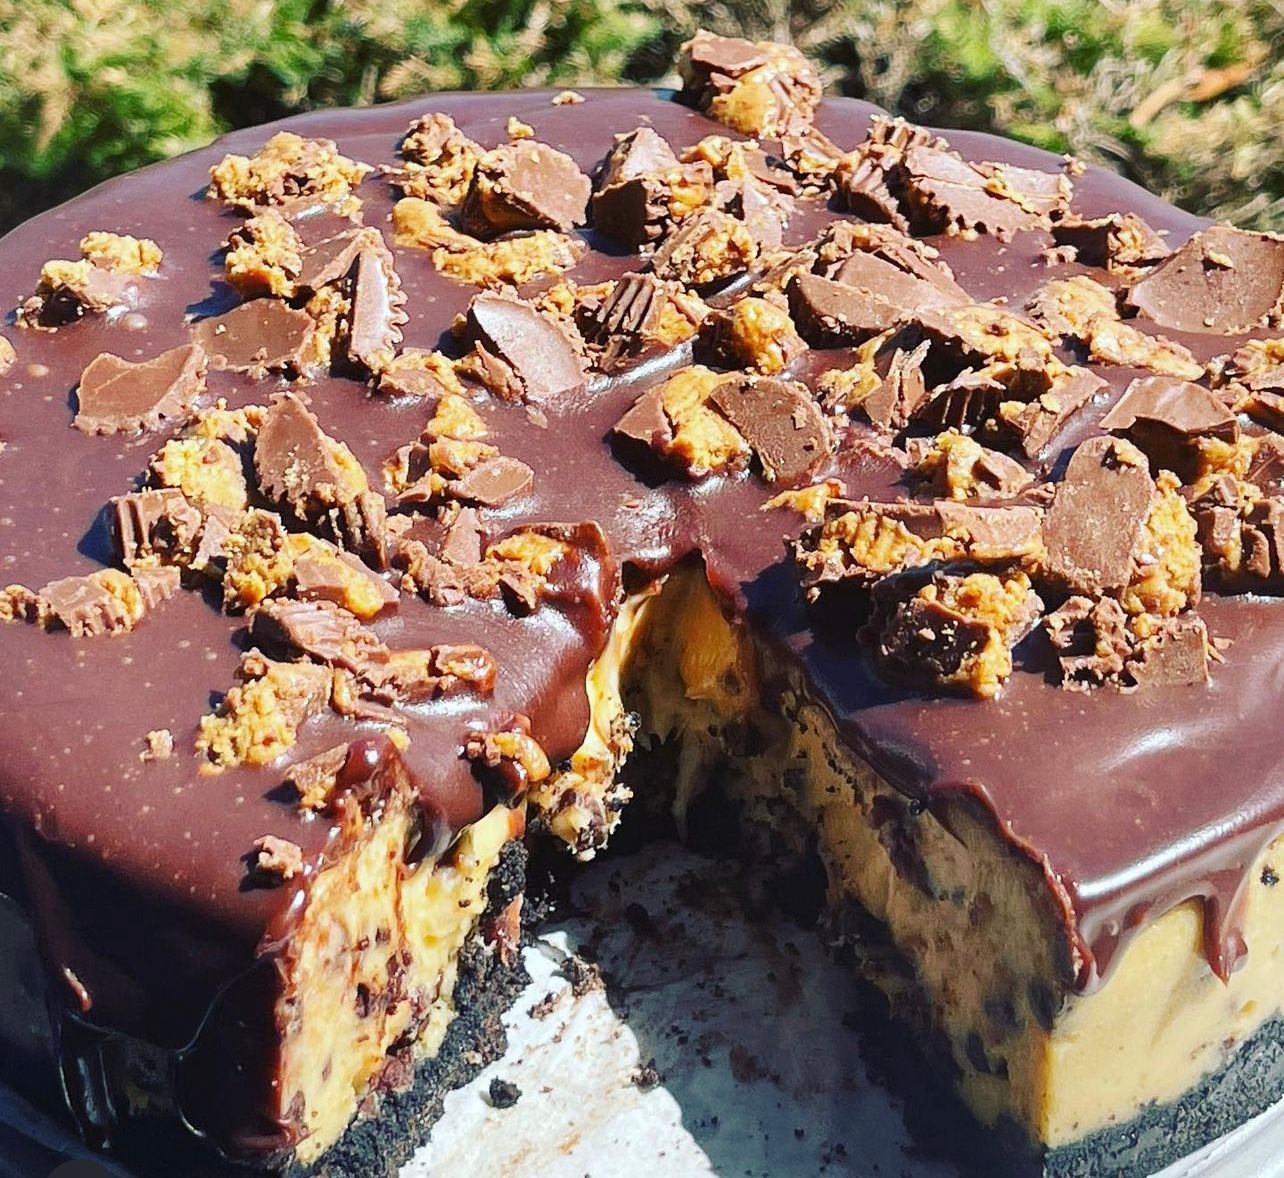 Reese’s Peanut Butter Cup Cheesecake by The Original Cold Smoked